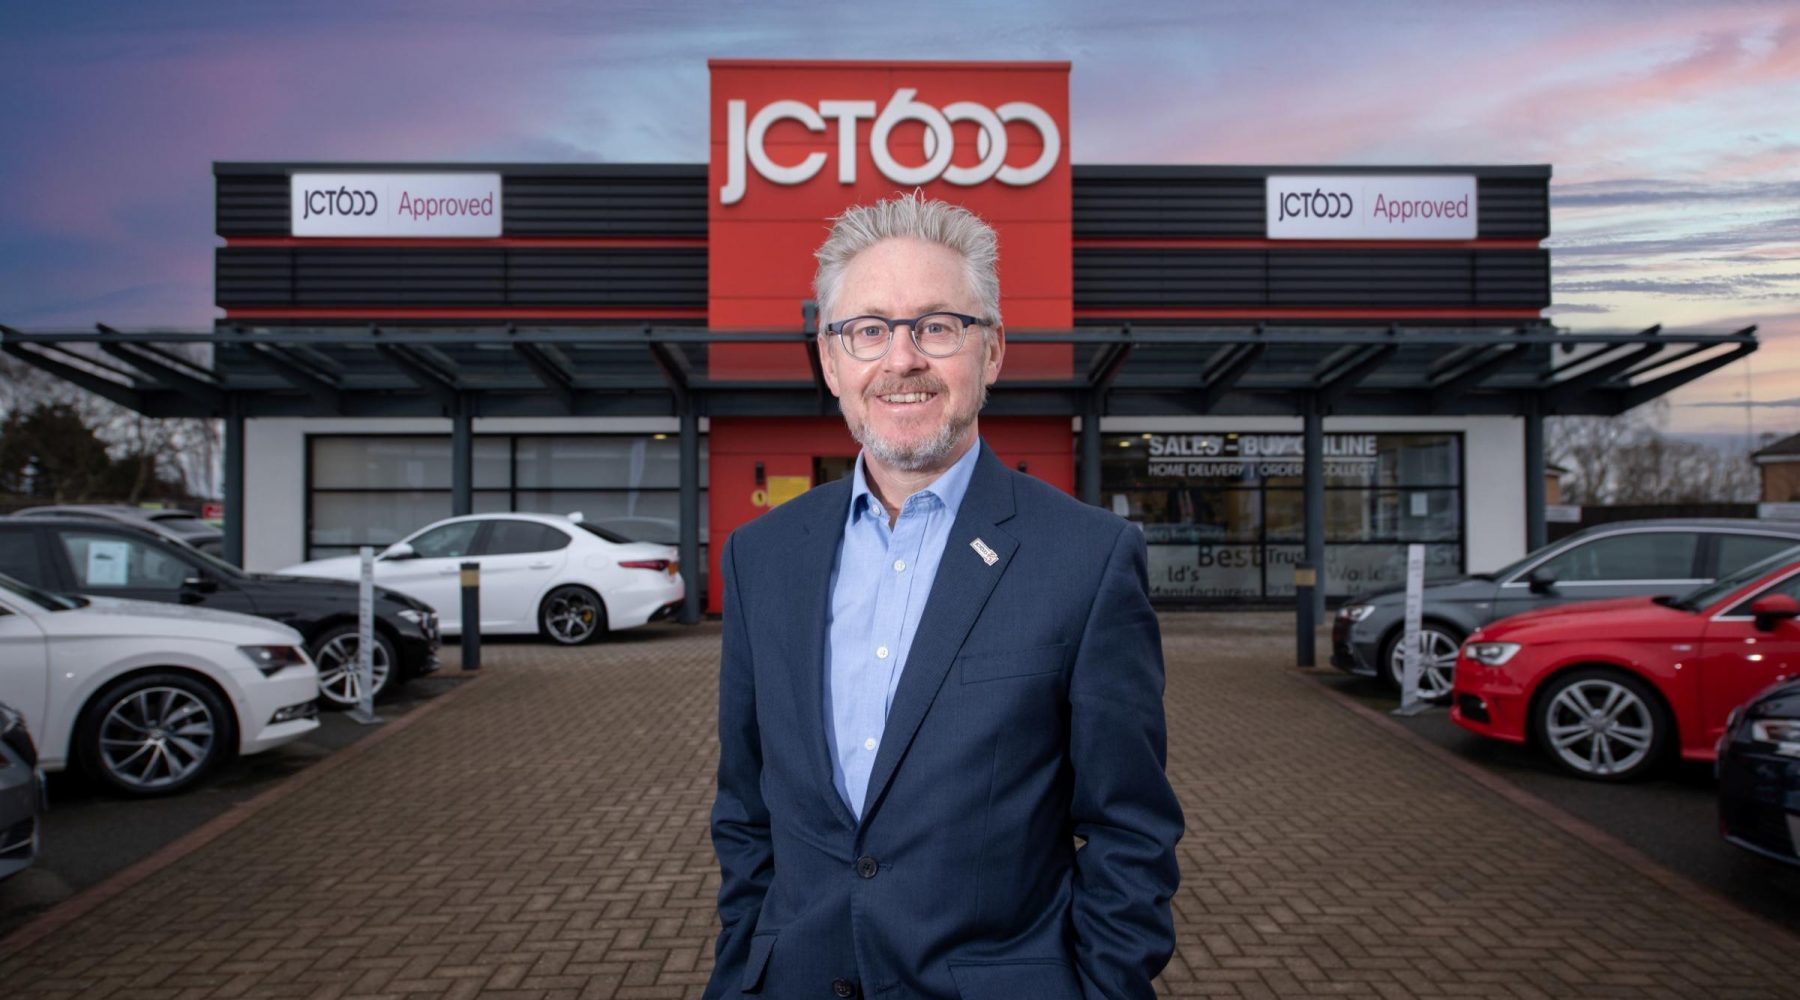 Bradford motor firm launches JCT600 Approved seal for…